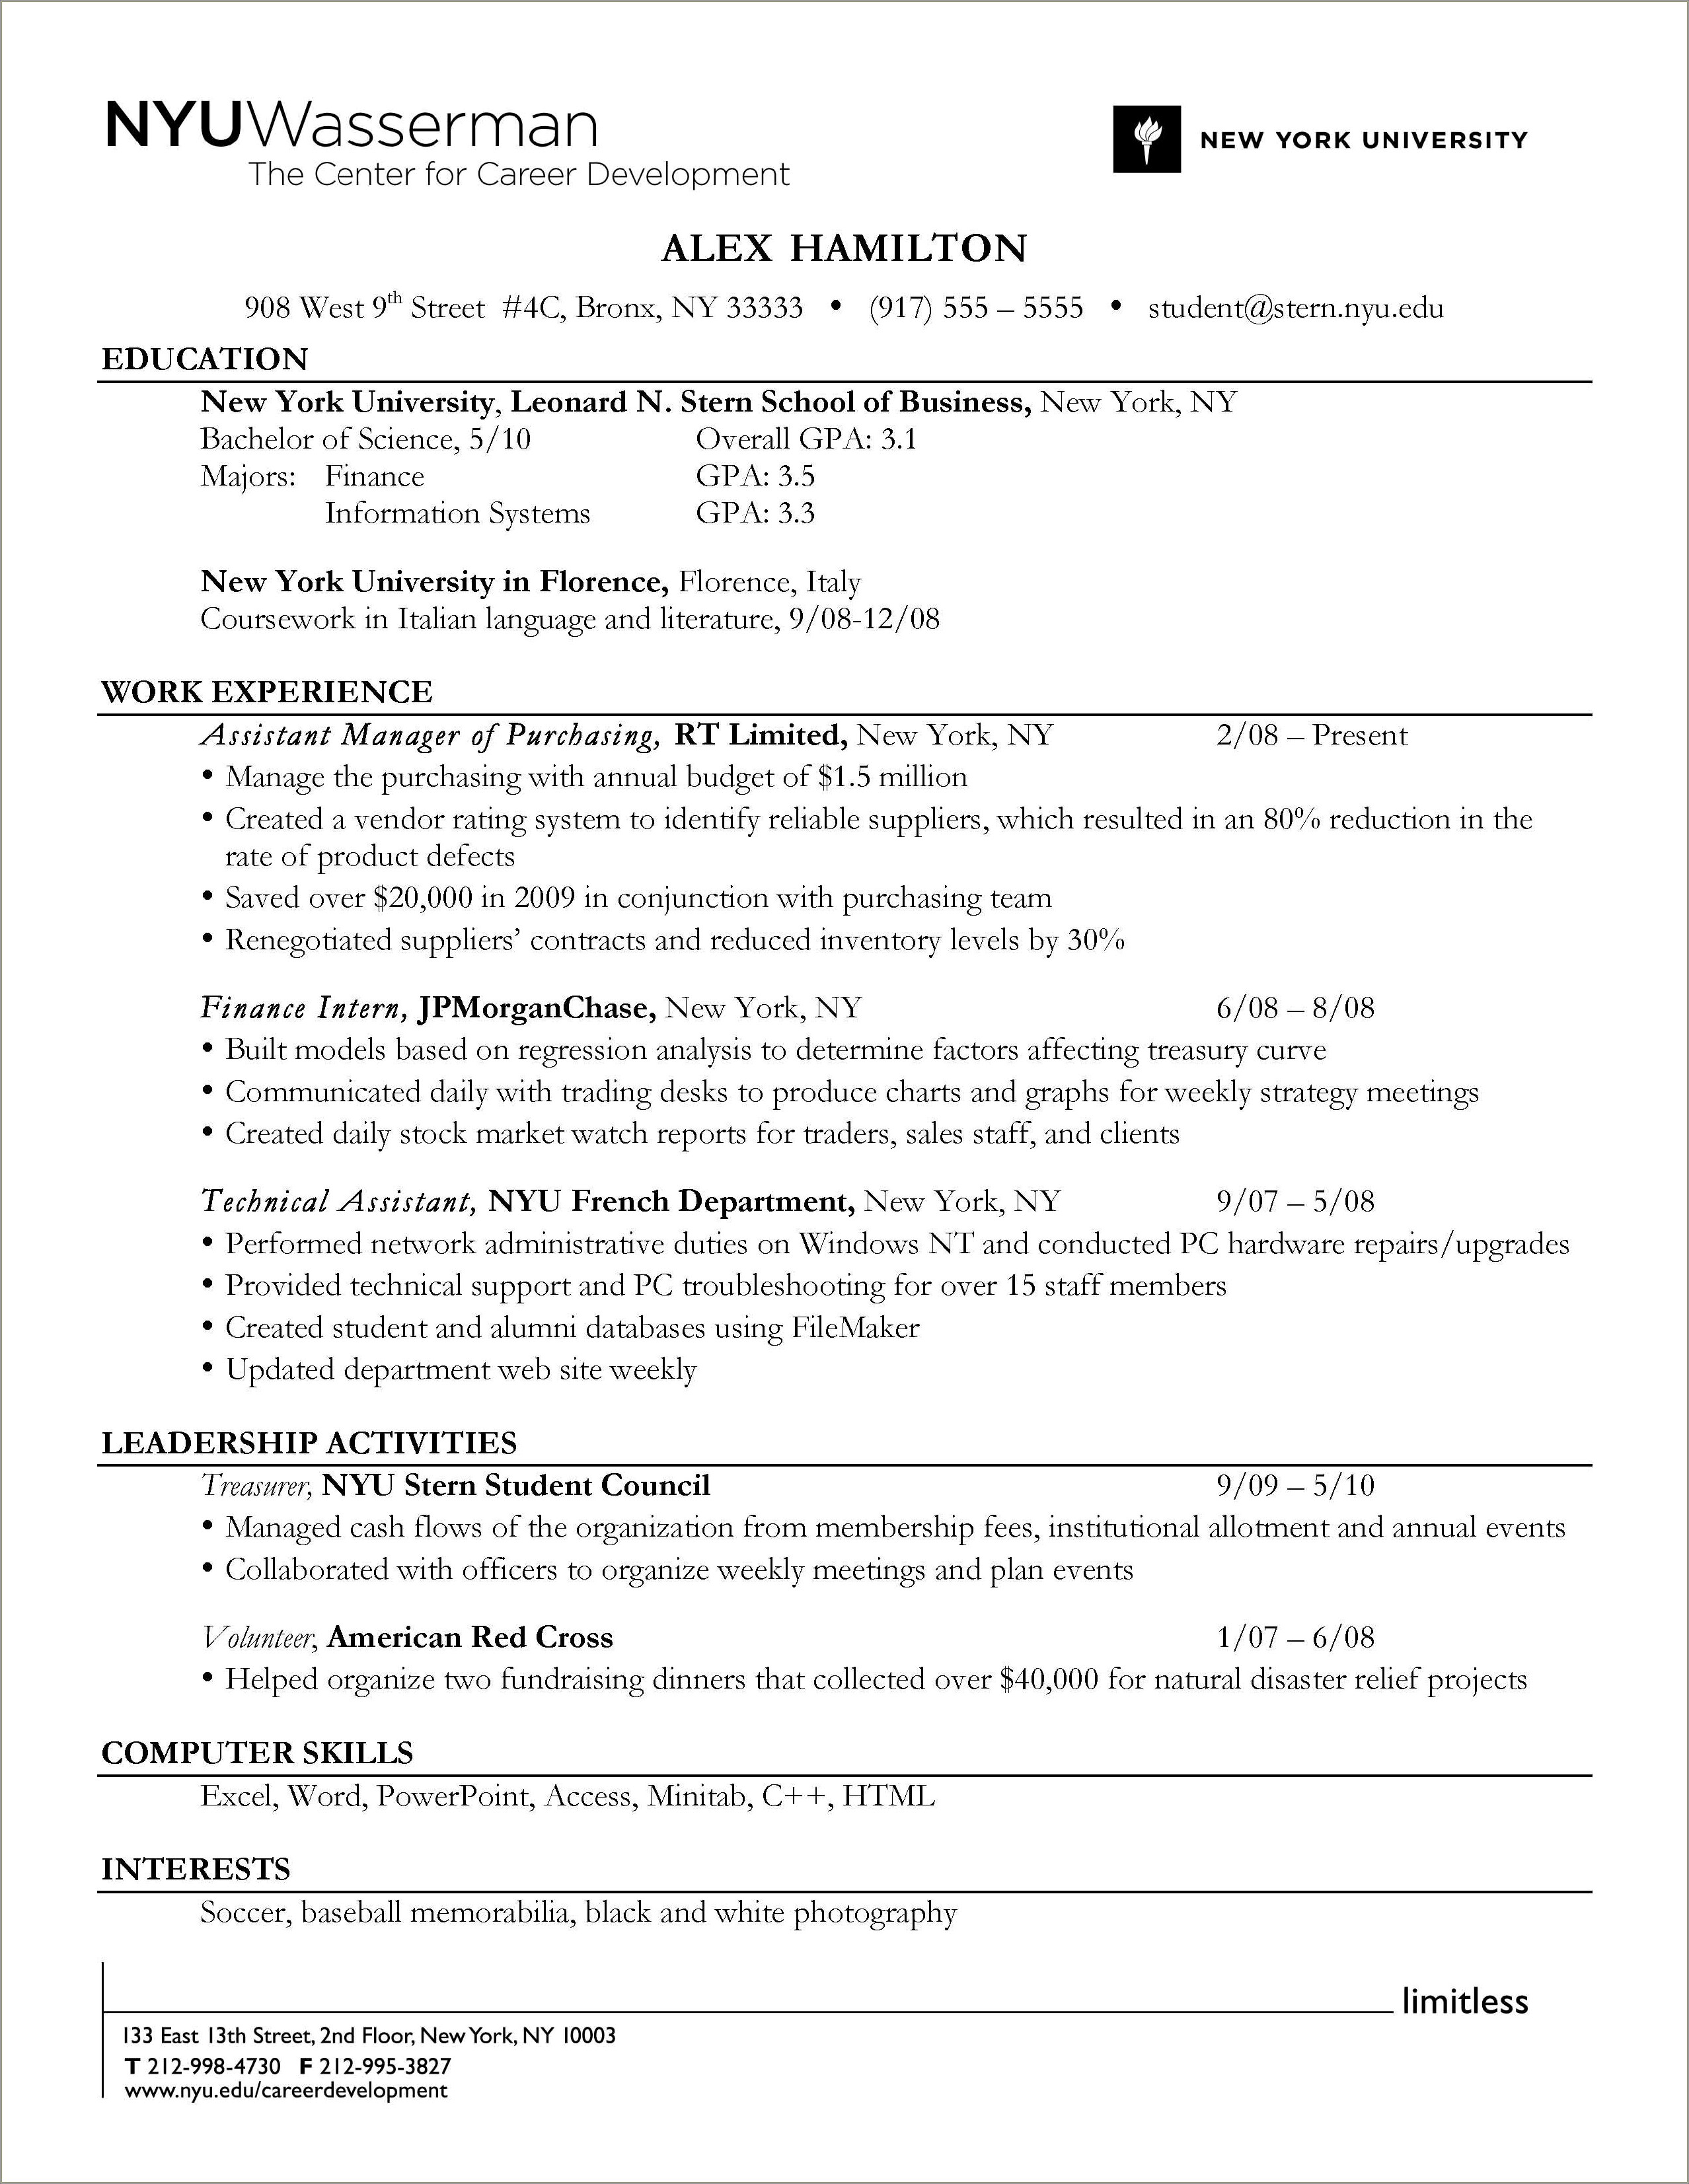 Listing Professional Experience On A Resume